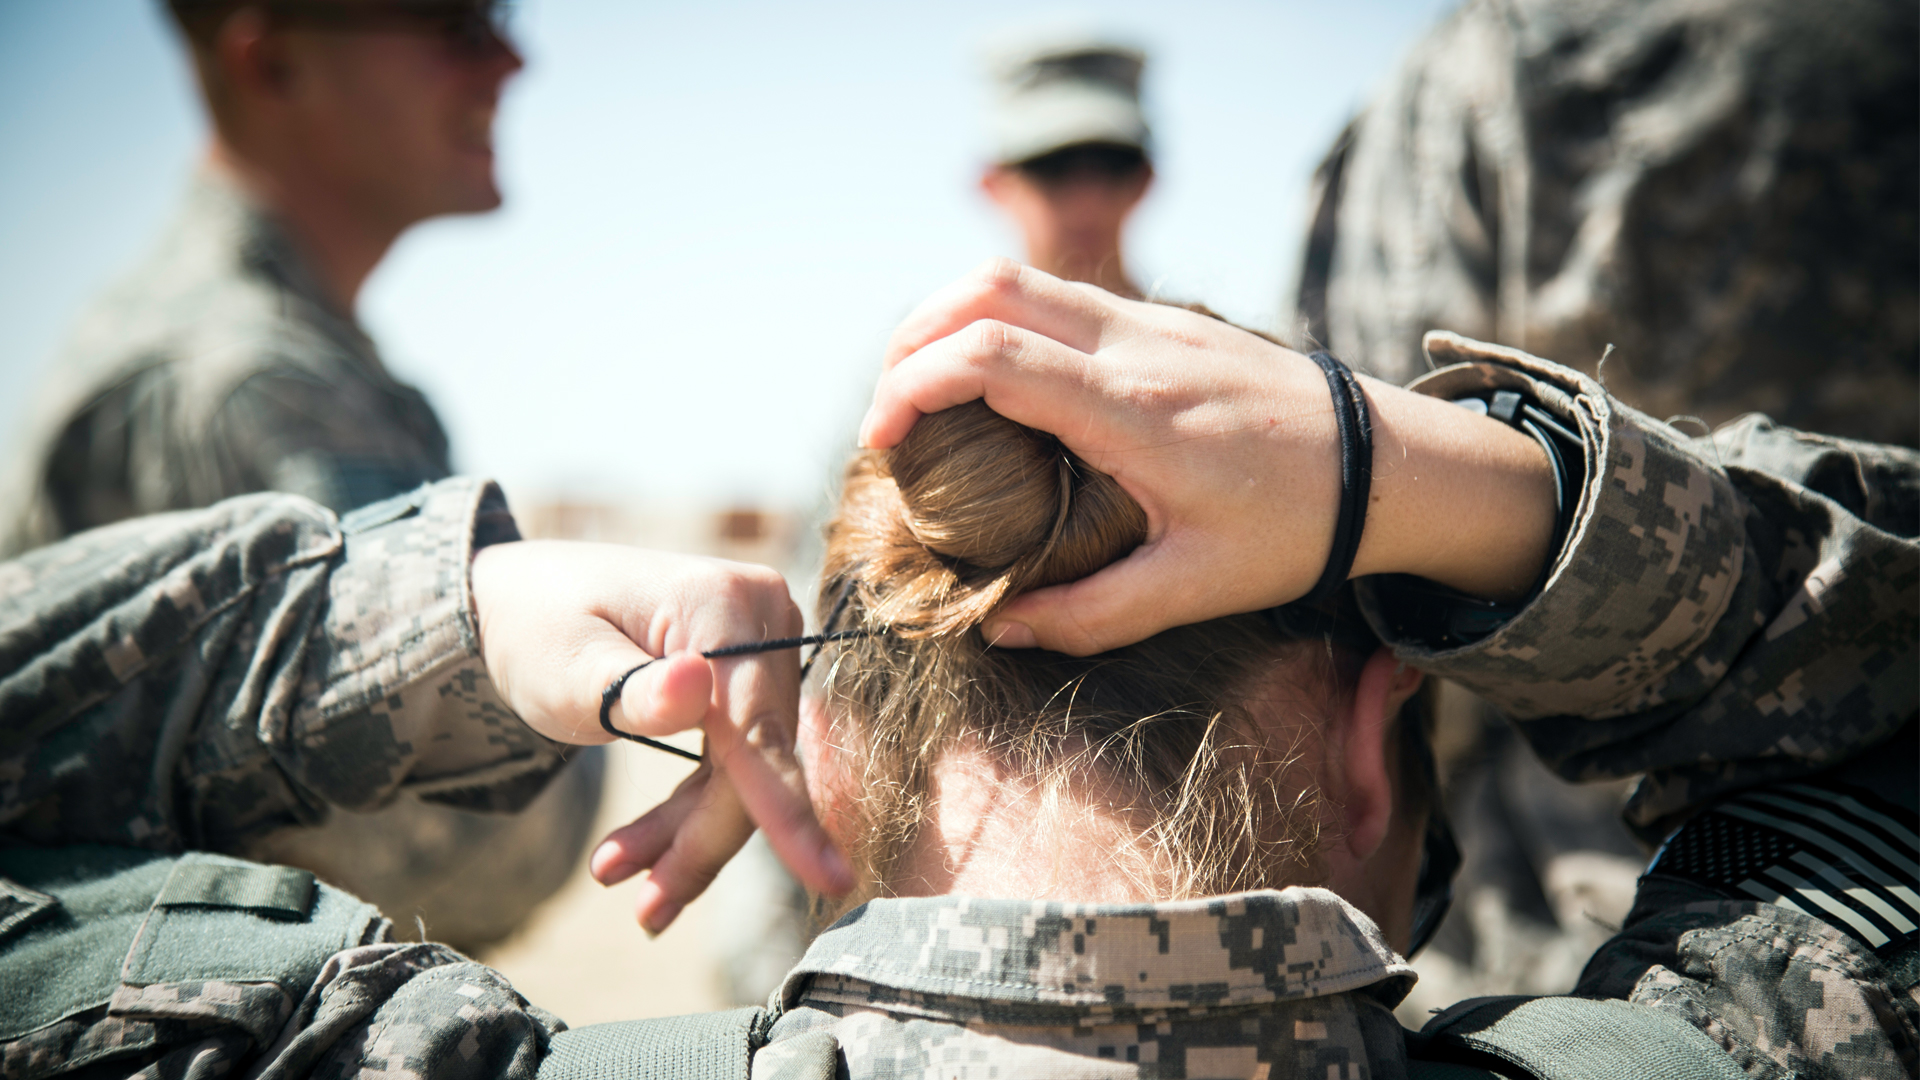 Army leaders announce loosened hairstyle restrictions including greater  flexibility for braids, twists, cornrows and other styles – Daily Press